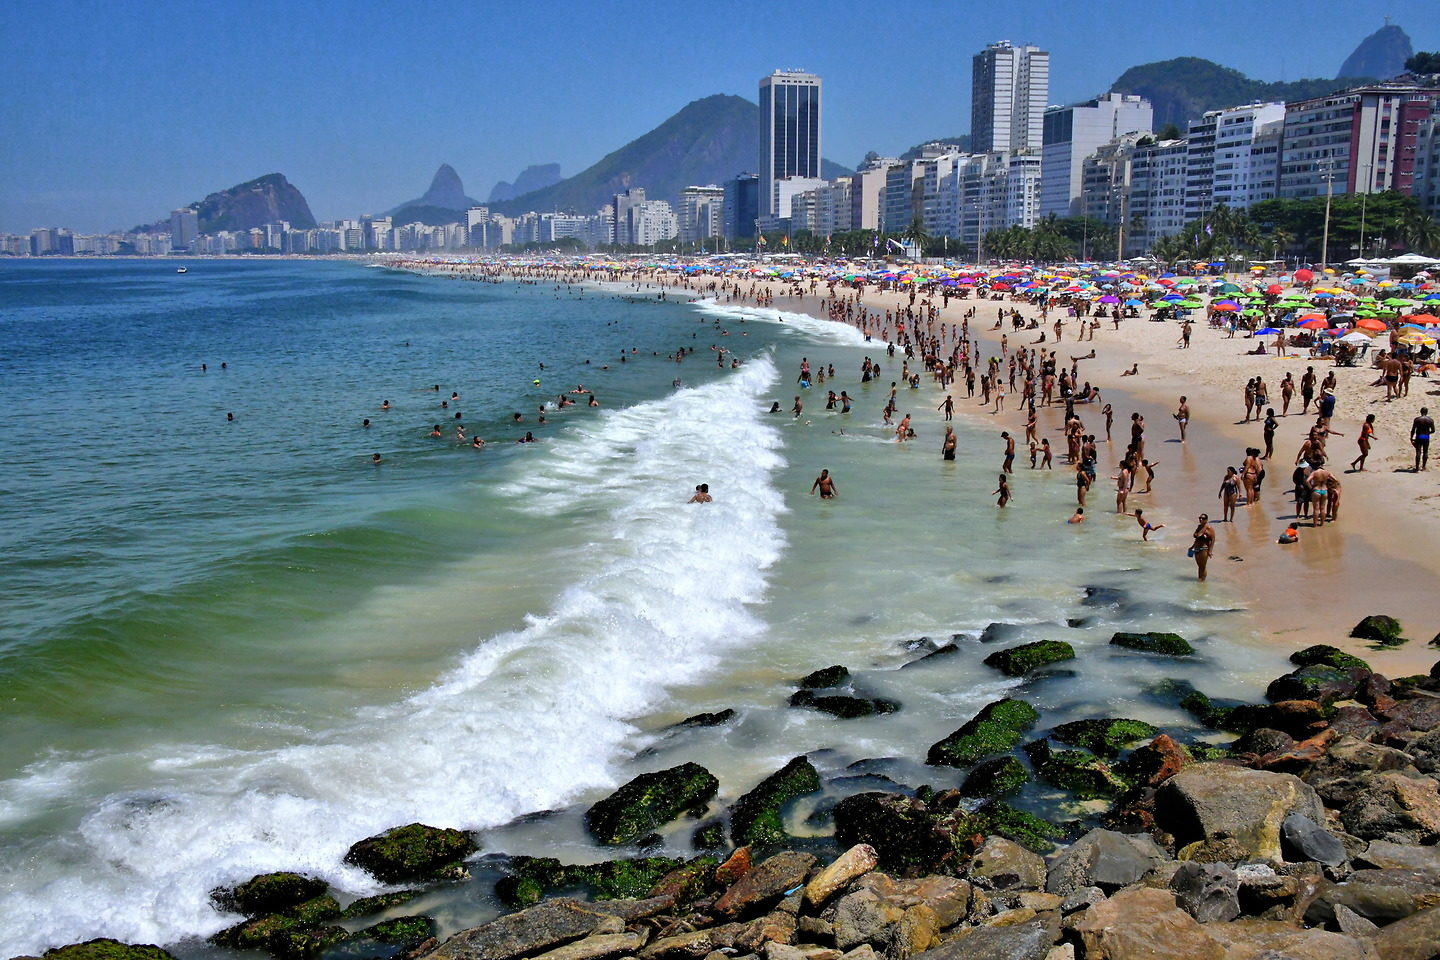 What You Need To Know About Brazilian Beach Culture